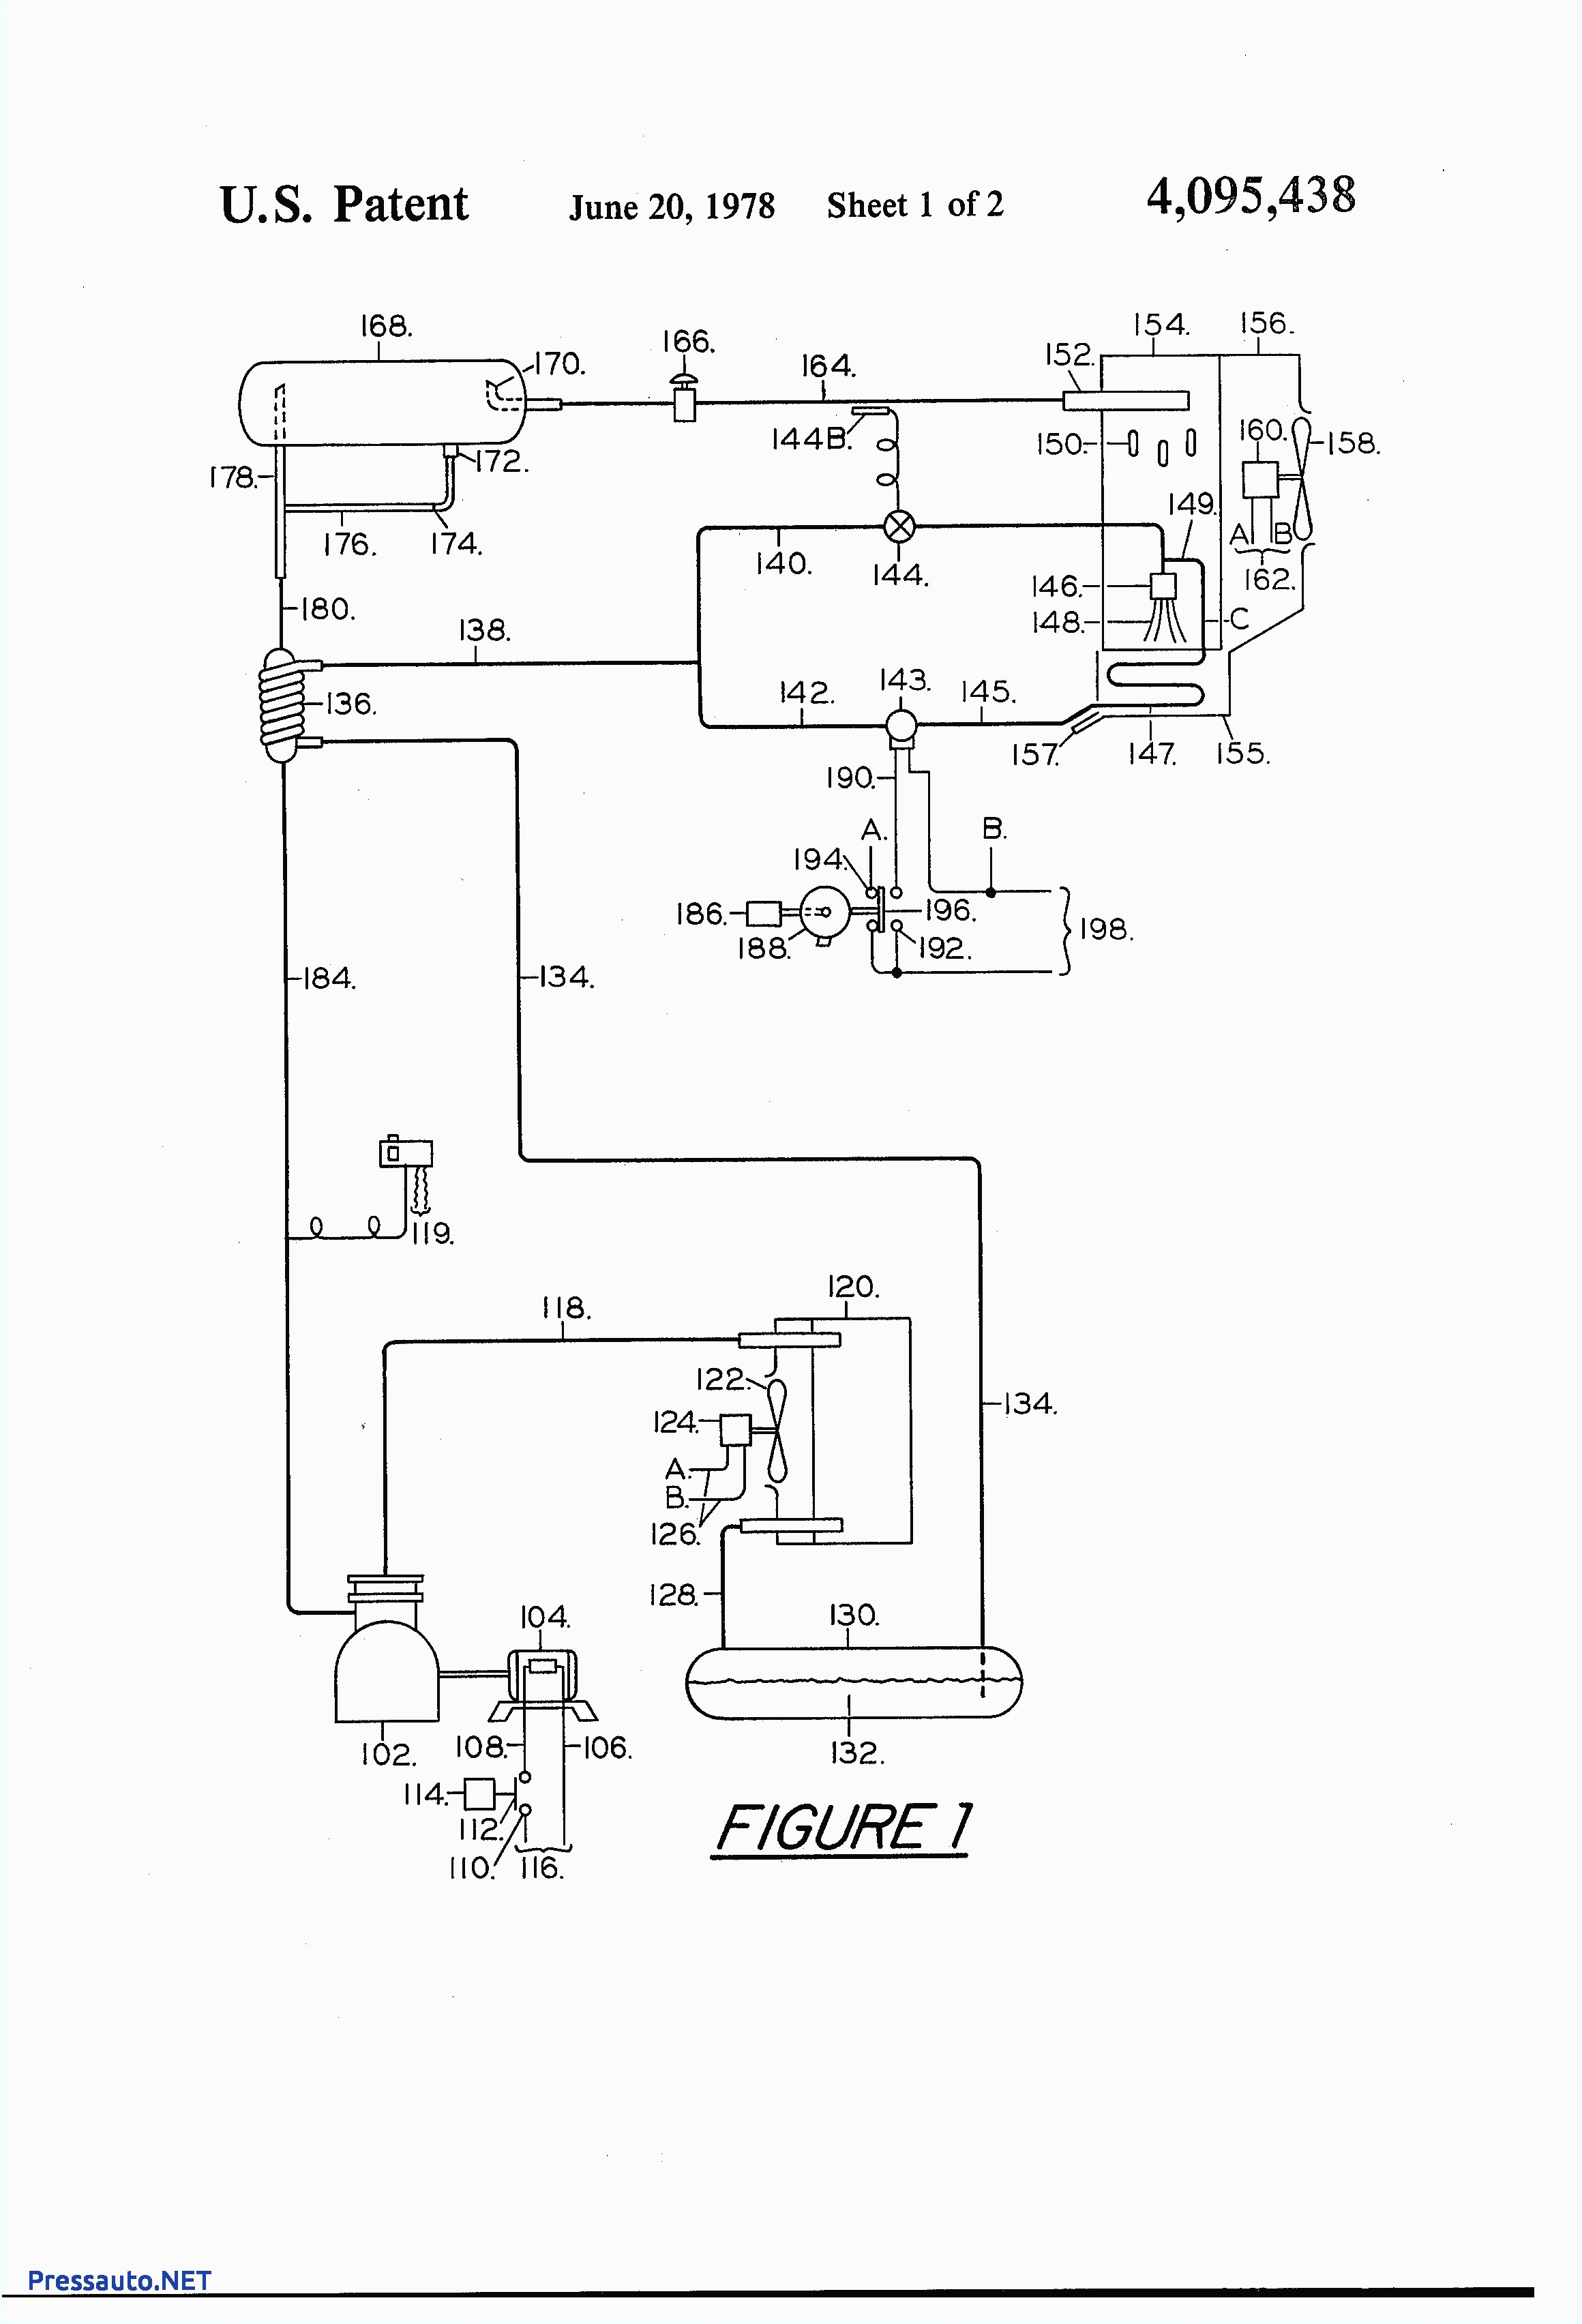 paragon 8141 wiring diagram best of paragon defrost timer 8145 20 wiring dia arcnx